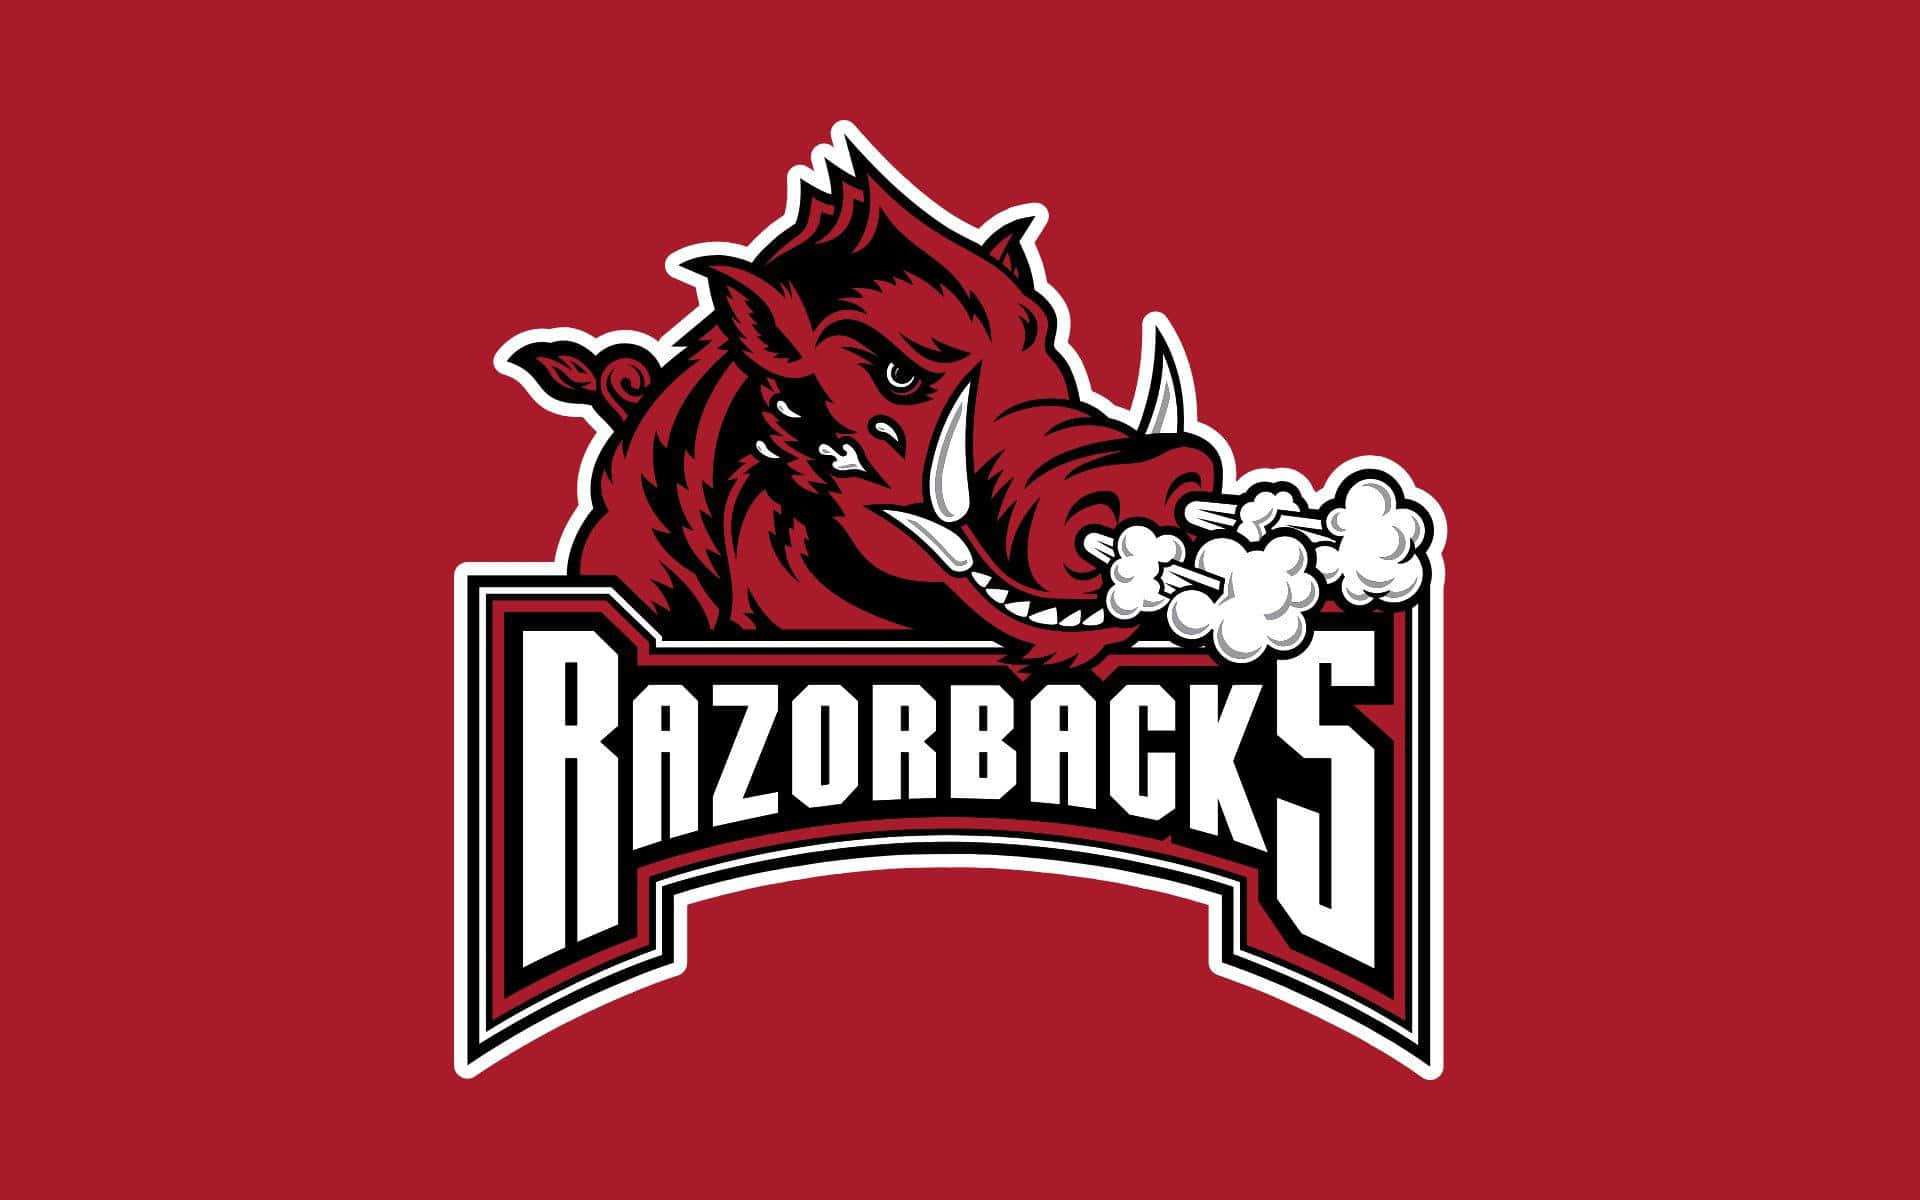 Get a Set of 12 Officially NCAA Licensed Arkansas Razorbacks iPhone  Wallpapers sized precisely for any model of iPhone   Arkansas razorbacks  Arkansas Razorbacks